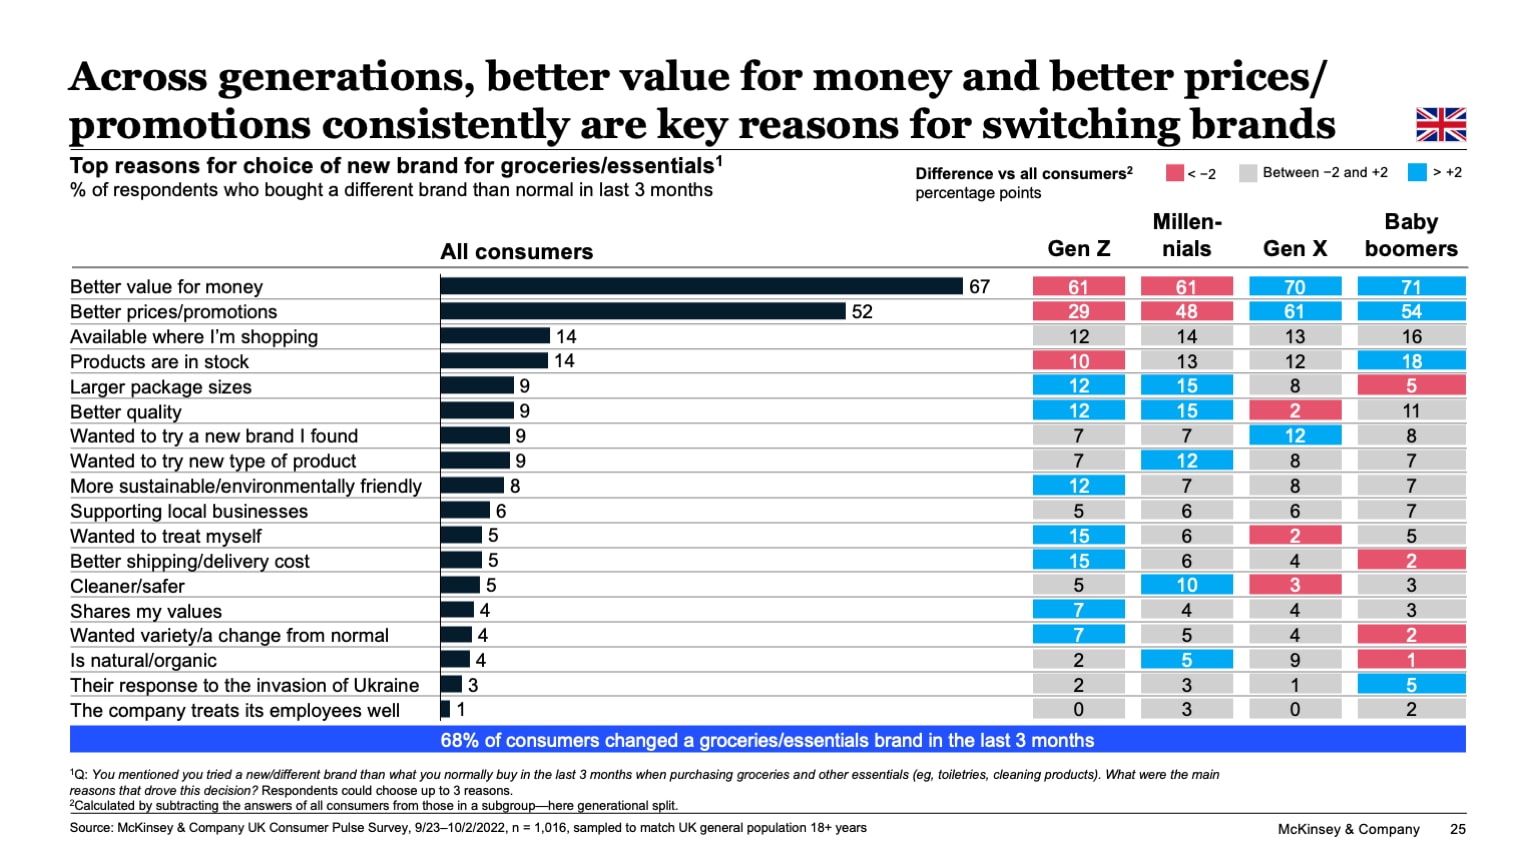 Across generations, better value for money and better prices/promotions consistently are key reasons for switching brands